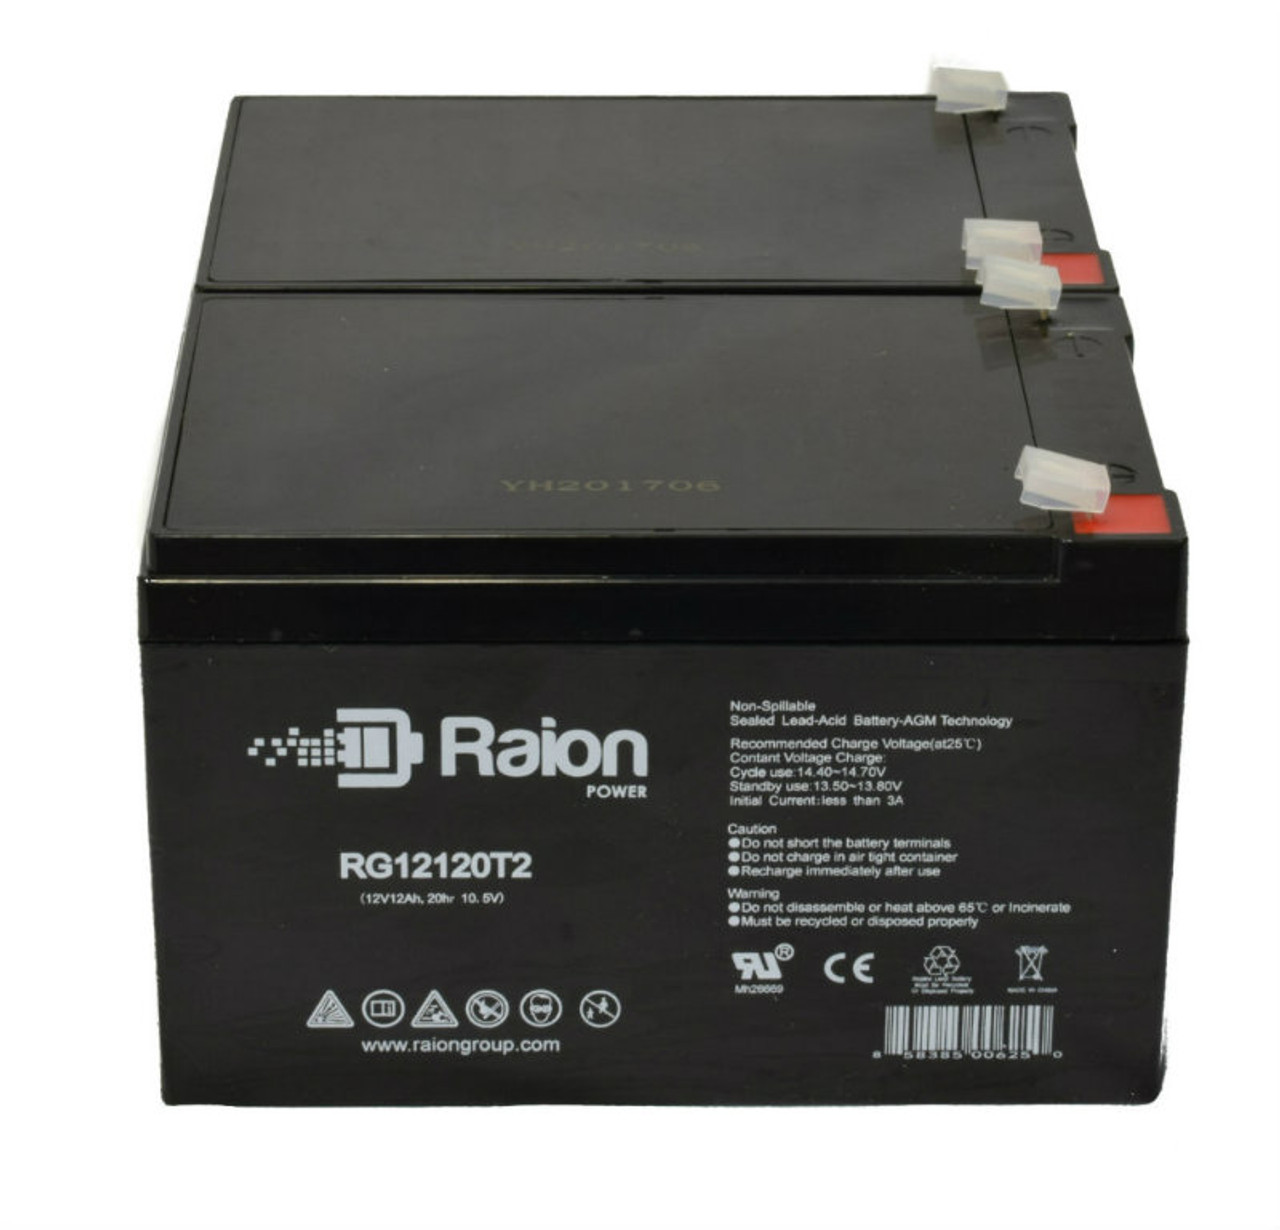 Raion Power RG12120T2 12V 12Ah Replacement UPS Battery for IBM1000 FRU - 2 Pack